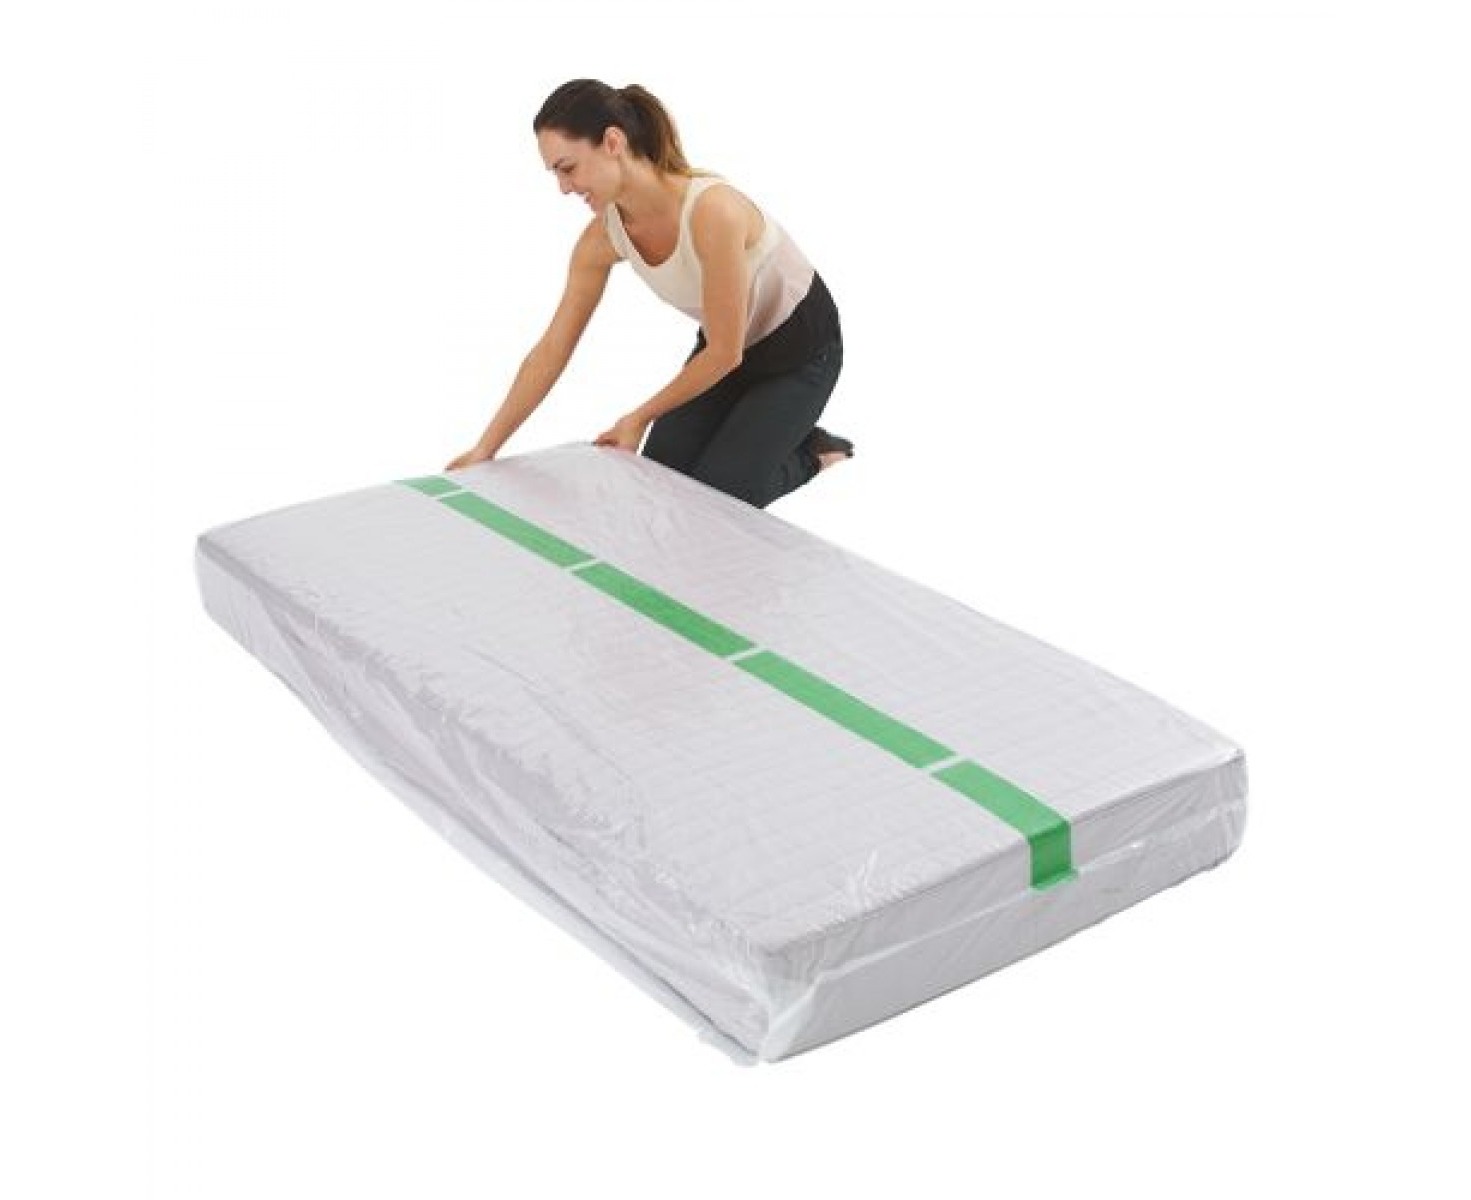 plastic to cover mattress for moving